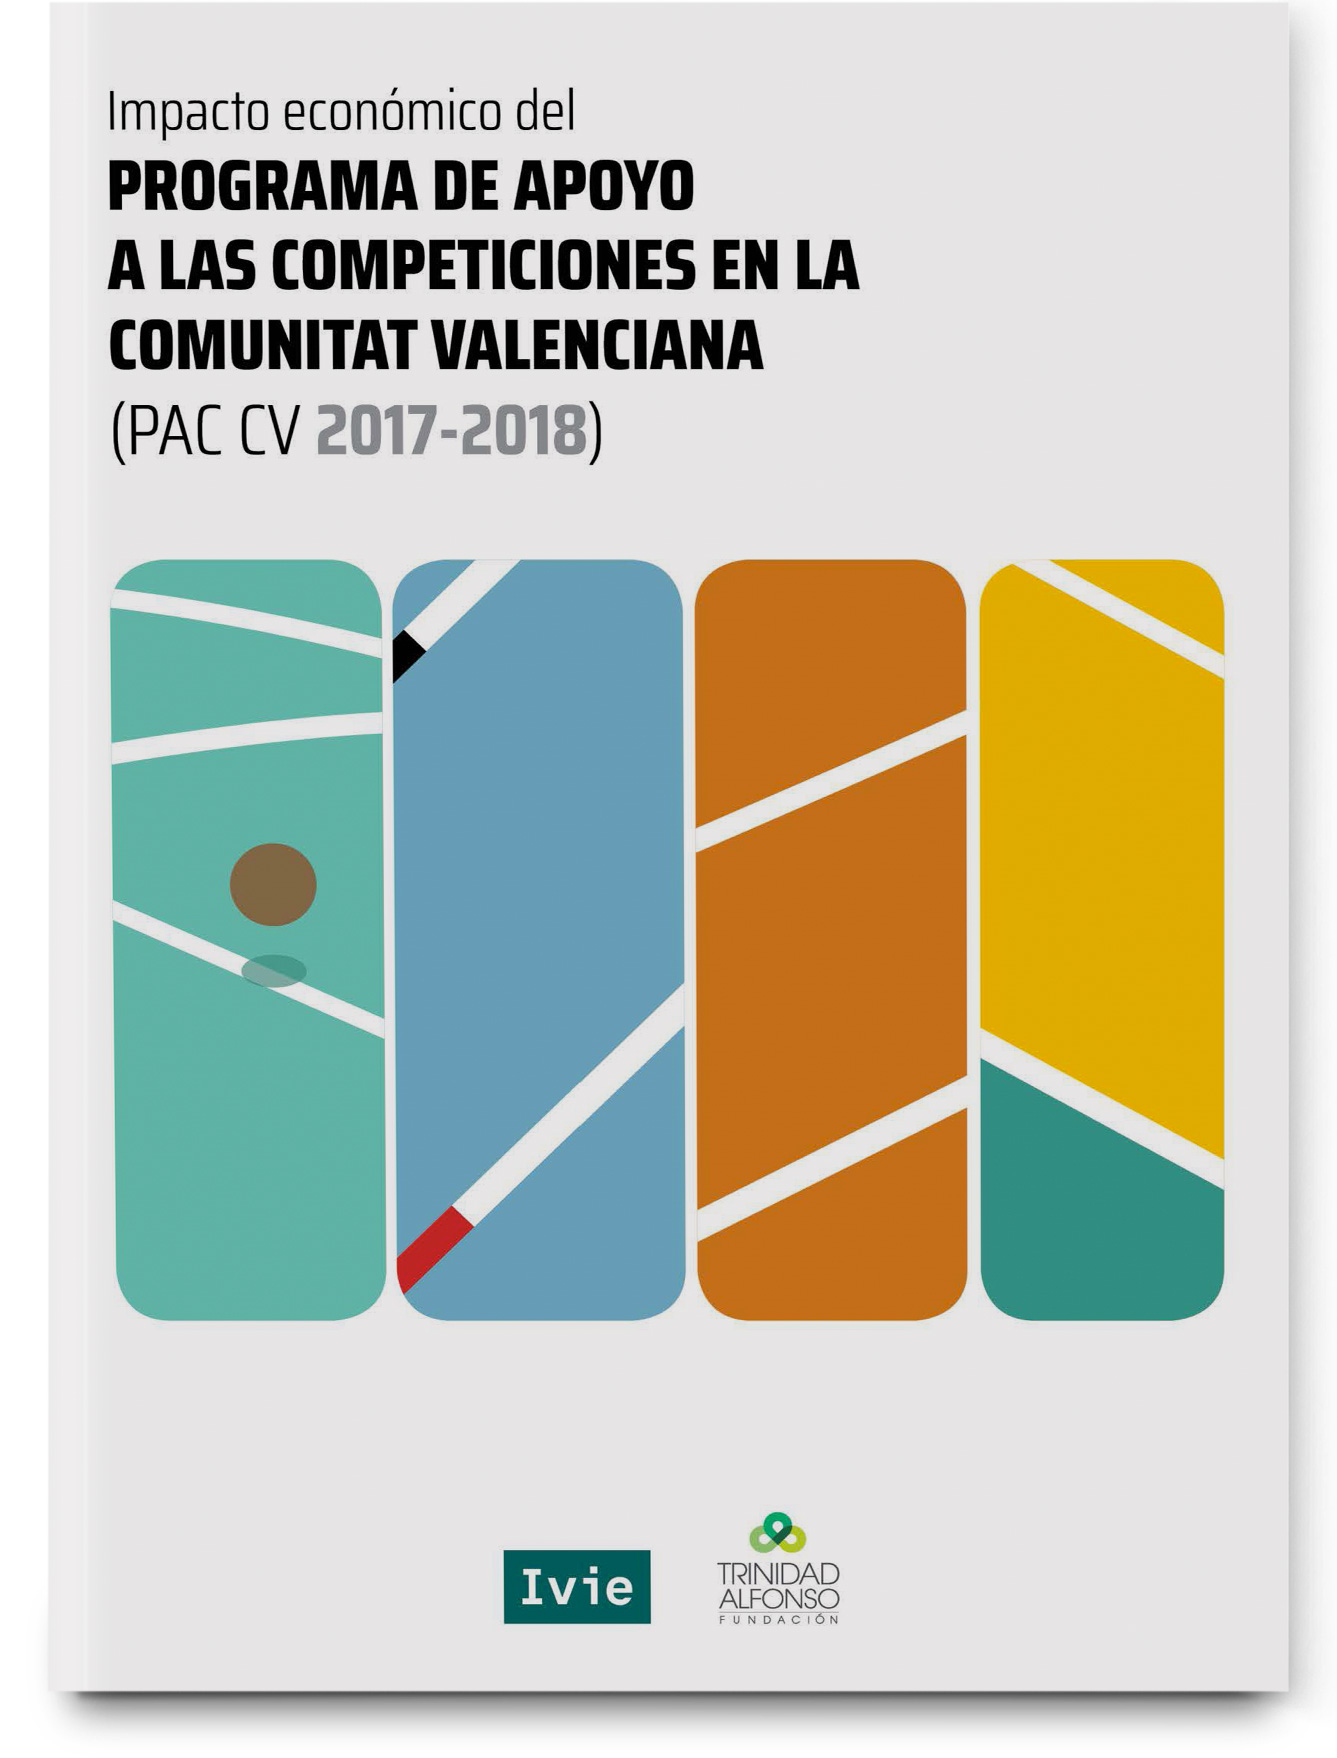 Economic Impact of the 2017 Trinidad Alfonso Foundation Program to Support Sports Competitions in the Valencian Community. 2nd Edition 